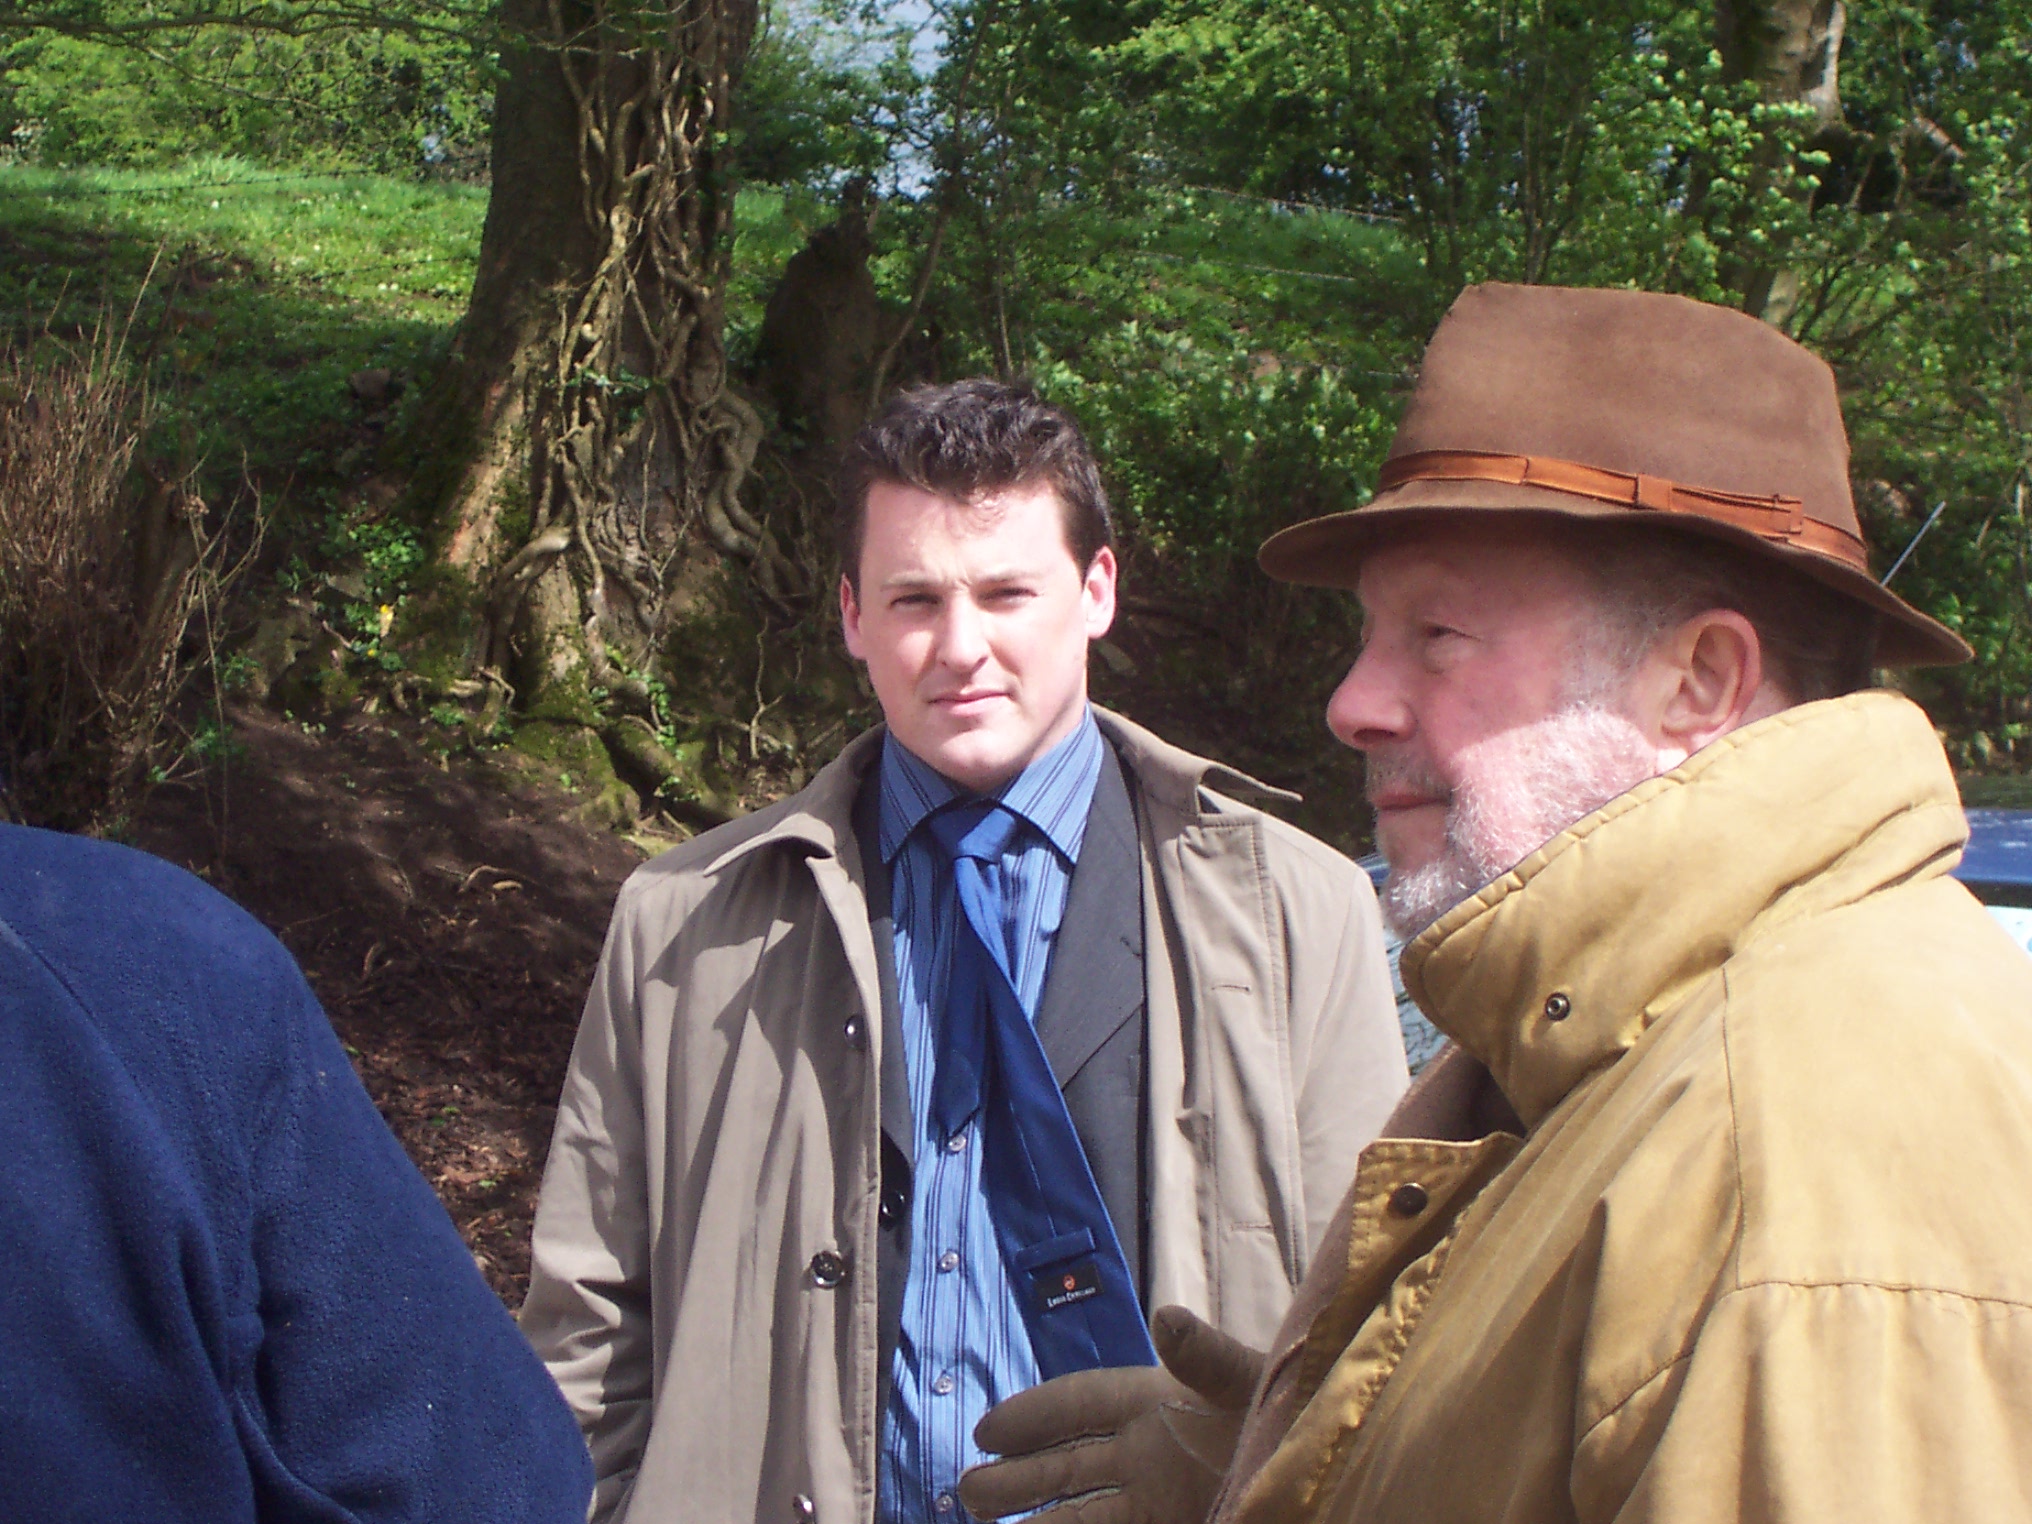 Declan Reynolds and director Nicolas Roeg on set of horror PUFFBALL (May 2006)